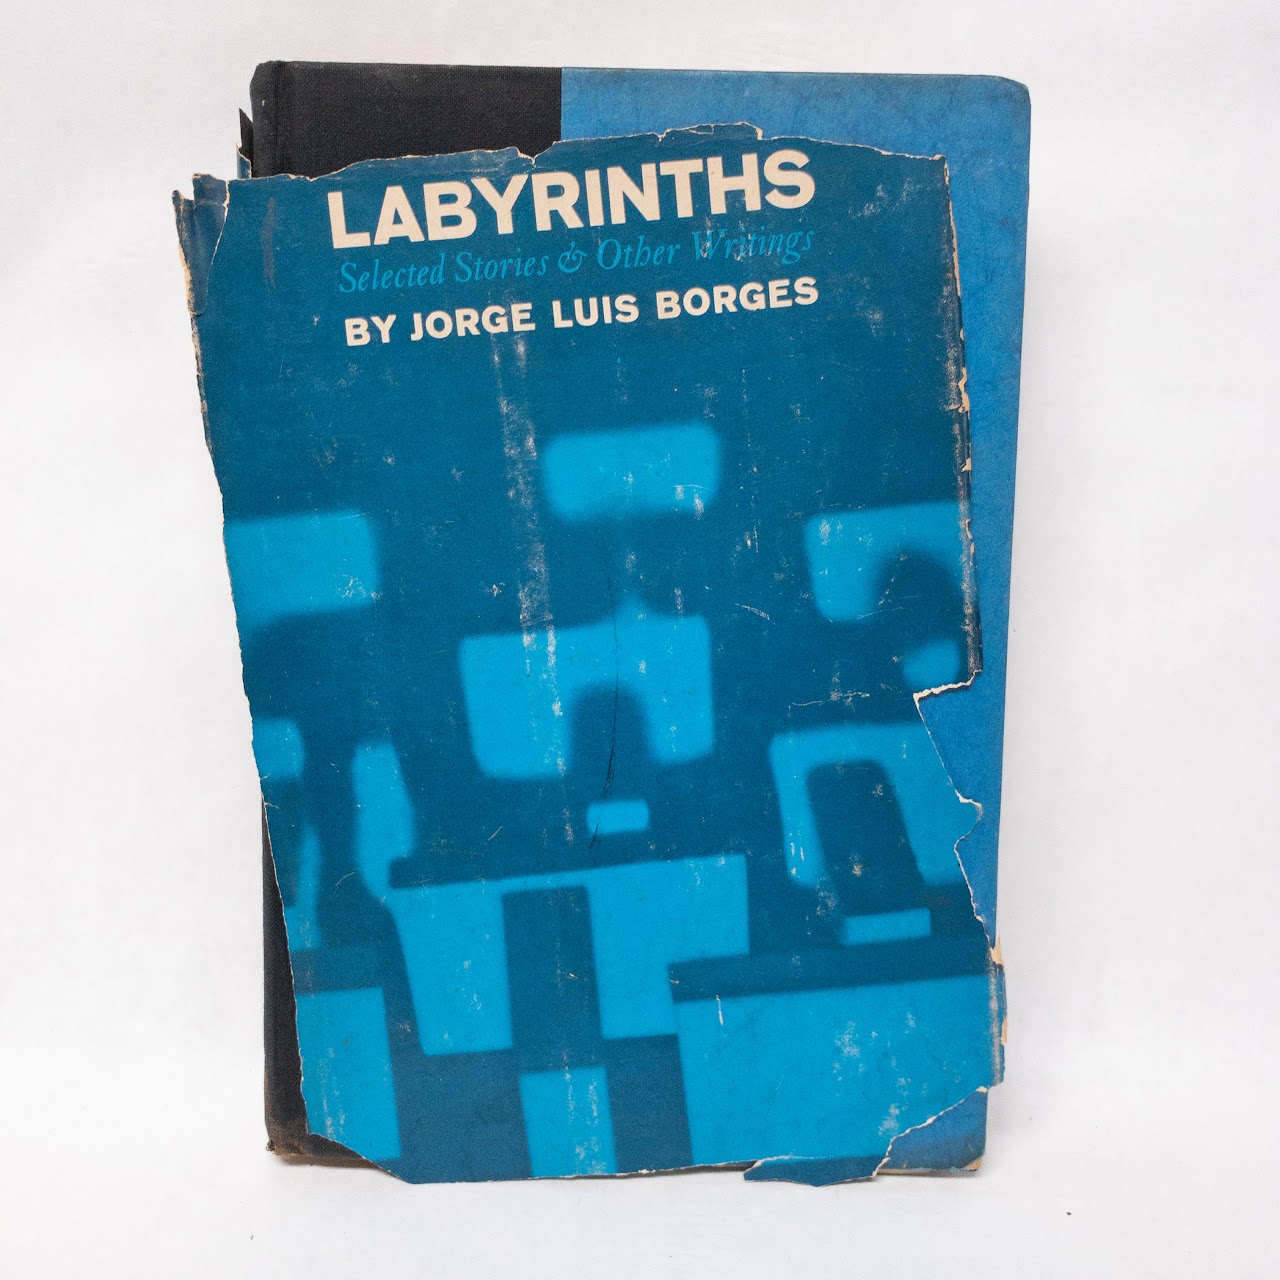 Jorge Luis Borges: "Labyrinths, Selected Stories & Other Writings" First Edition